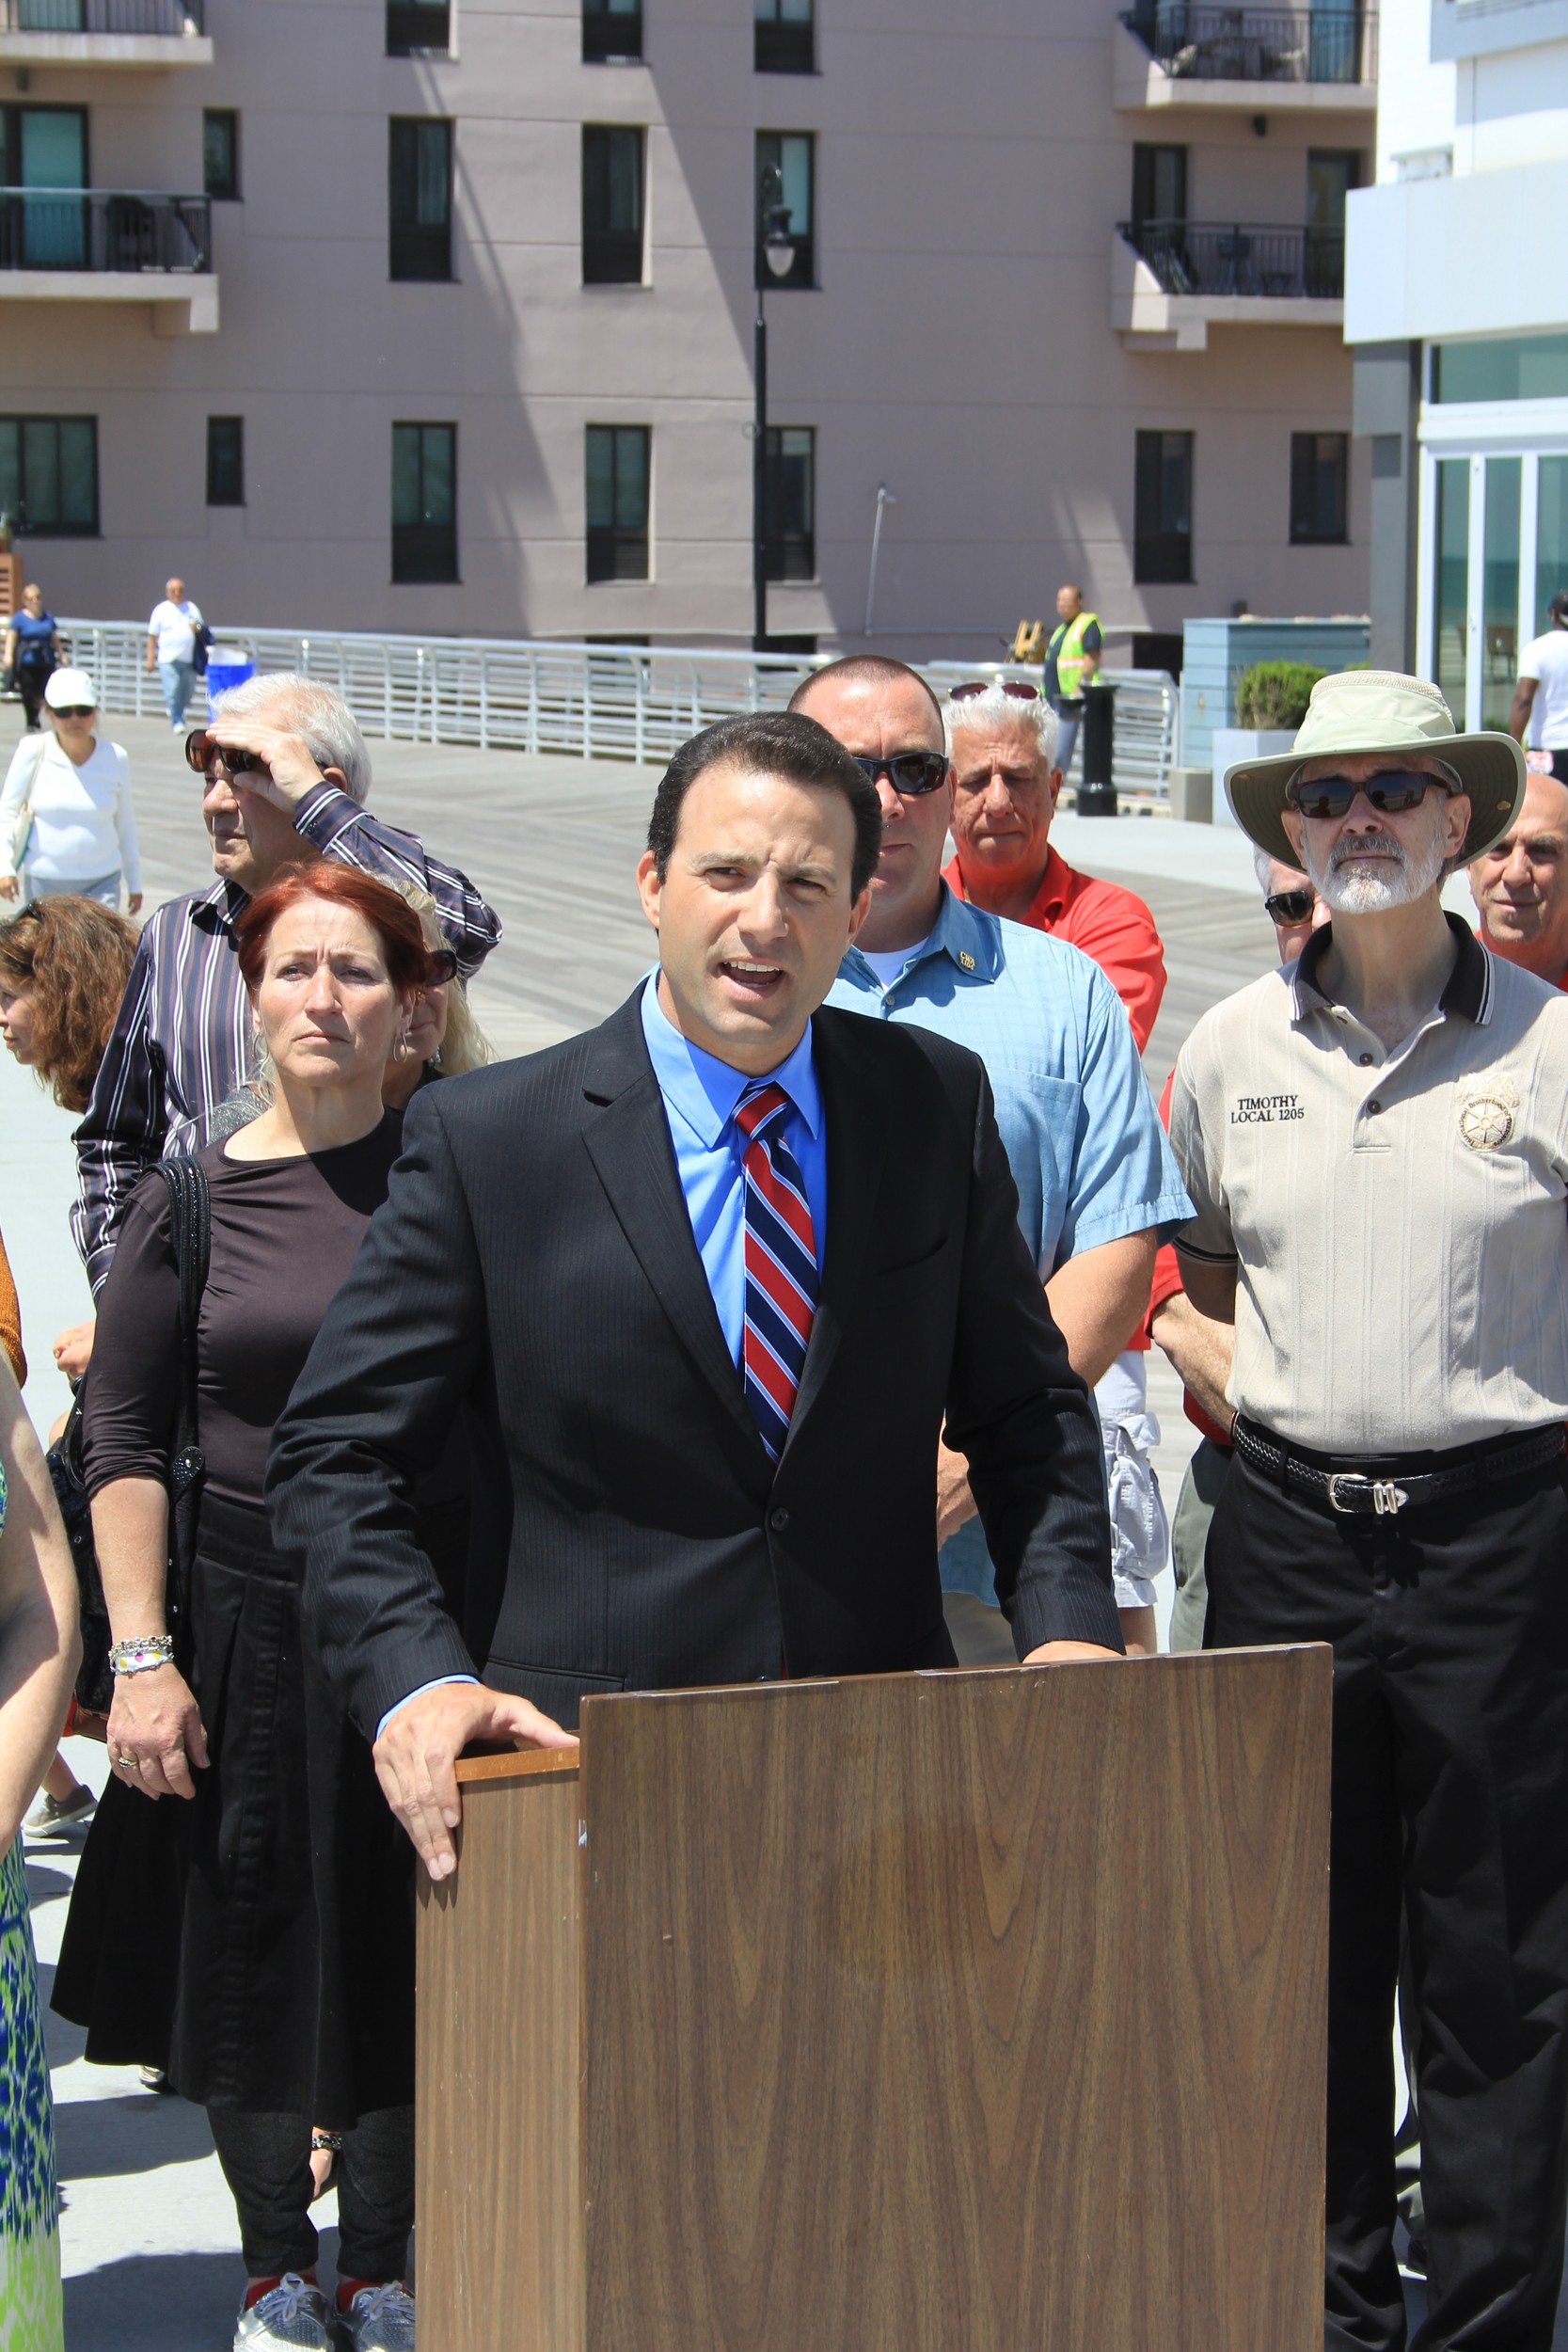 Councilman Anthony Eramo, pictured at a press conference on the boardwalk in 2014, announced his candidacy for State Assembly last month and was endorsed by the Working Families Party and the Nassau Independence Party on Tuesday.